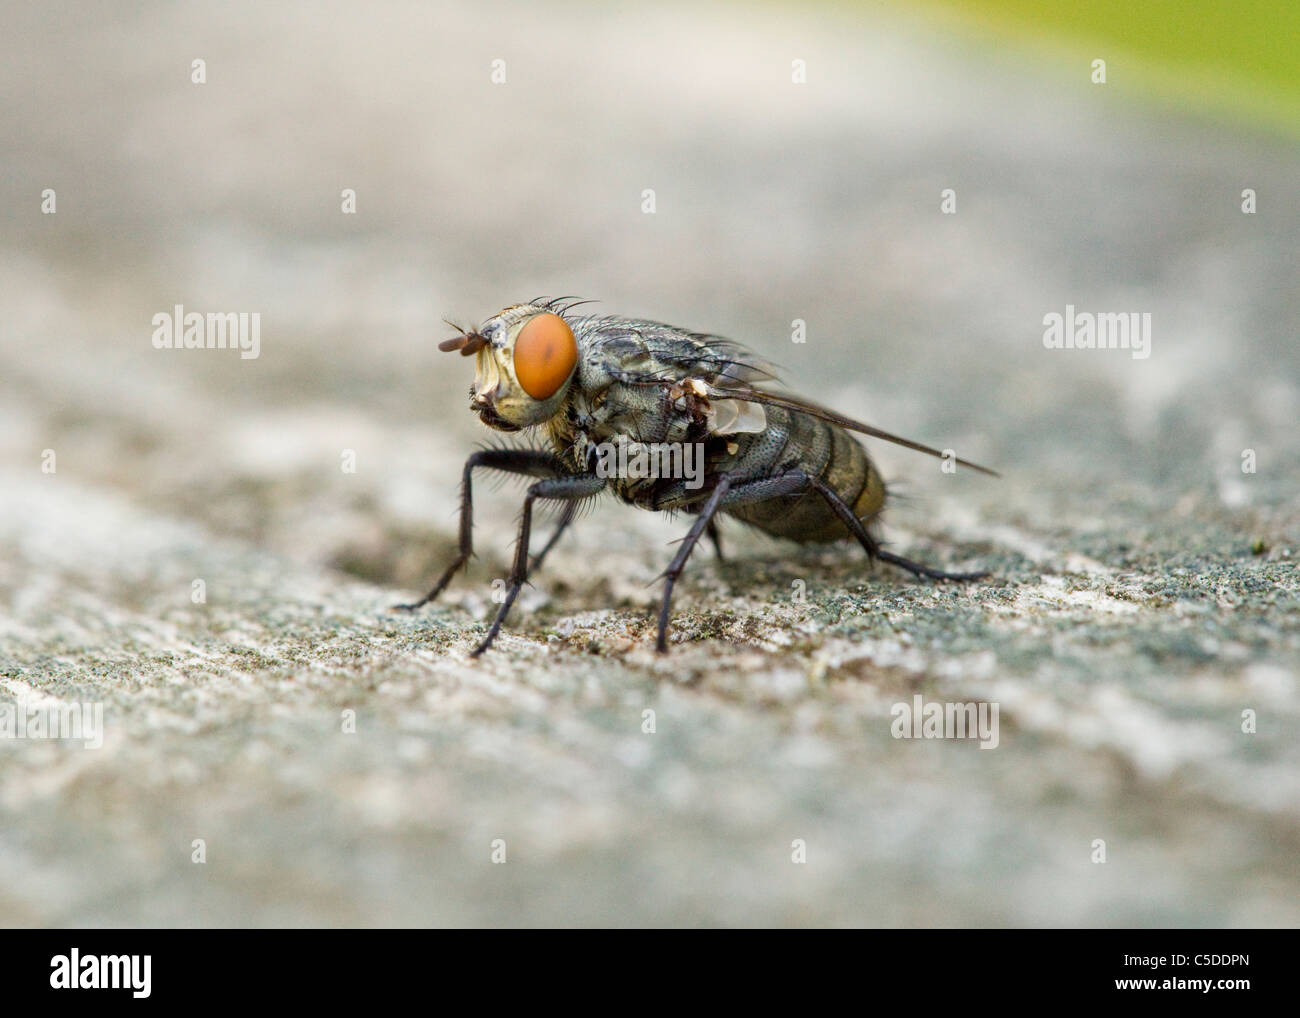 Common housefly (Musca domestica) closeup detail Stock Photo